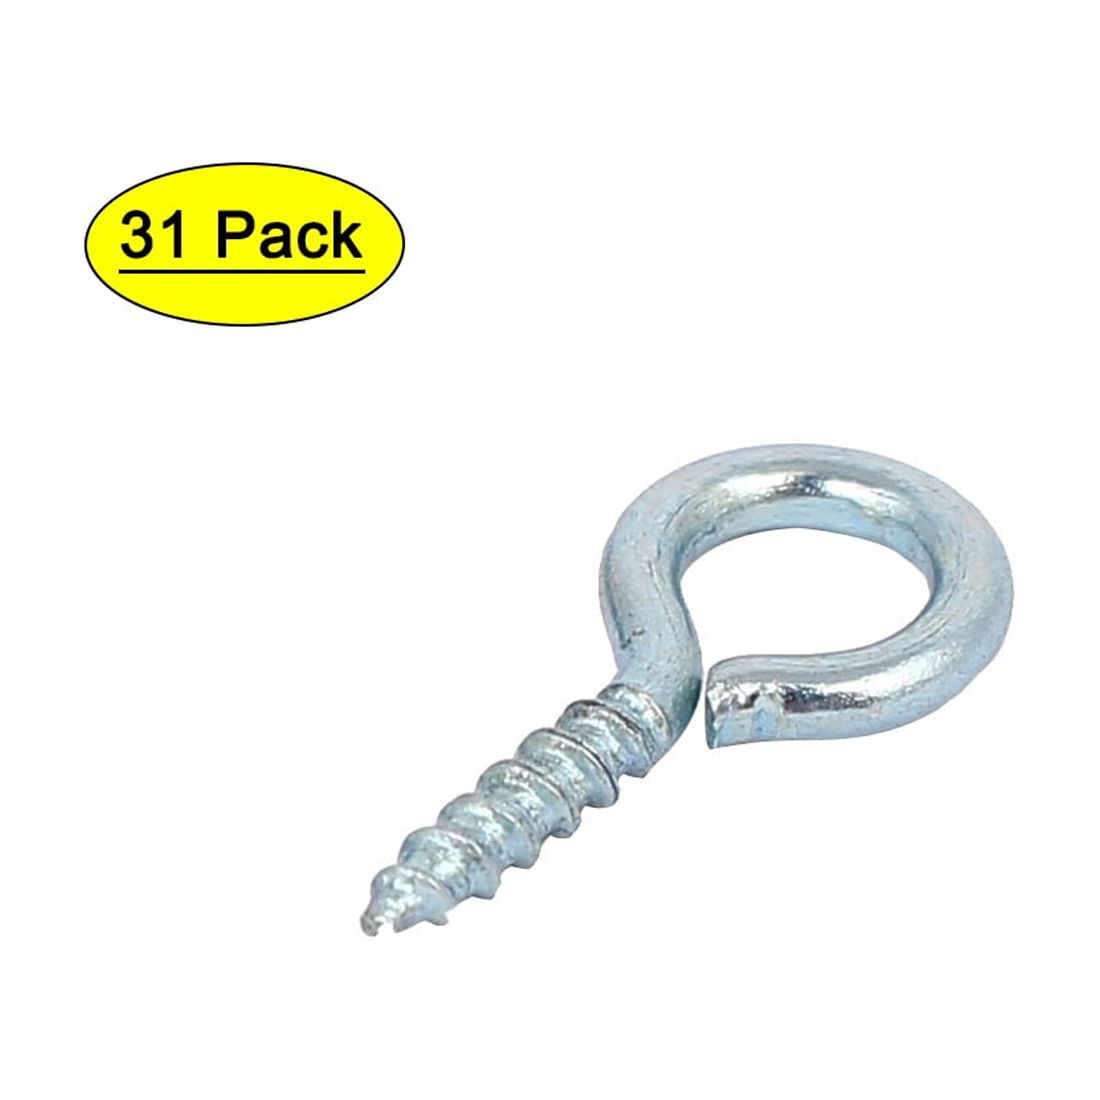 Uxcell Garden Round End Zinc Plated Iron Self Tapping Screw Eye